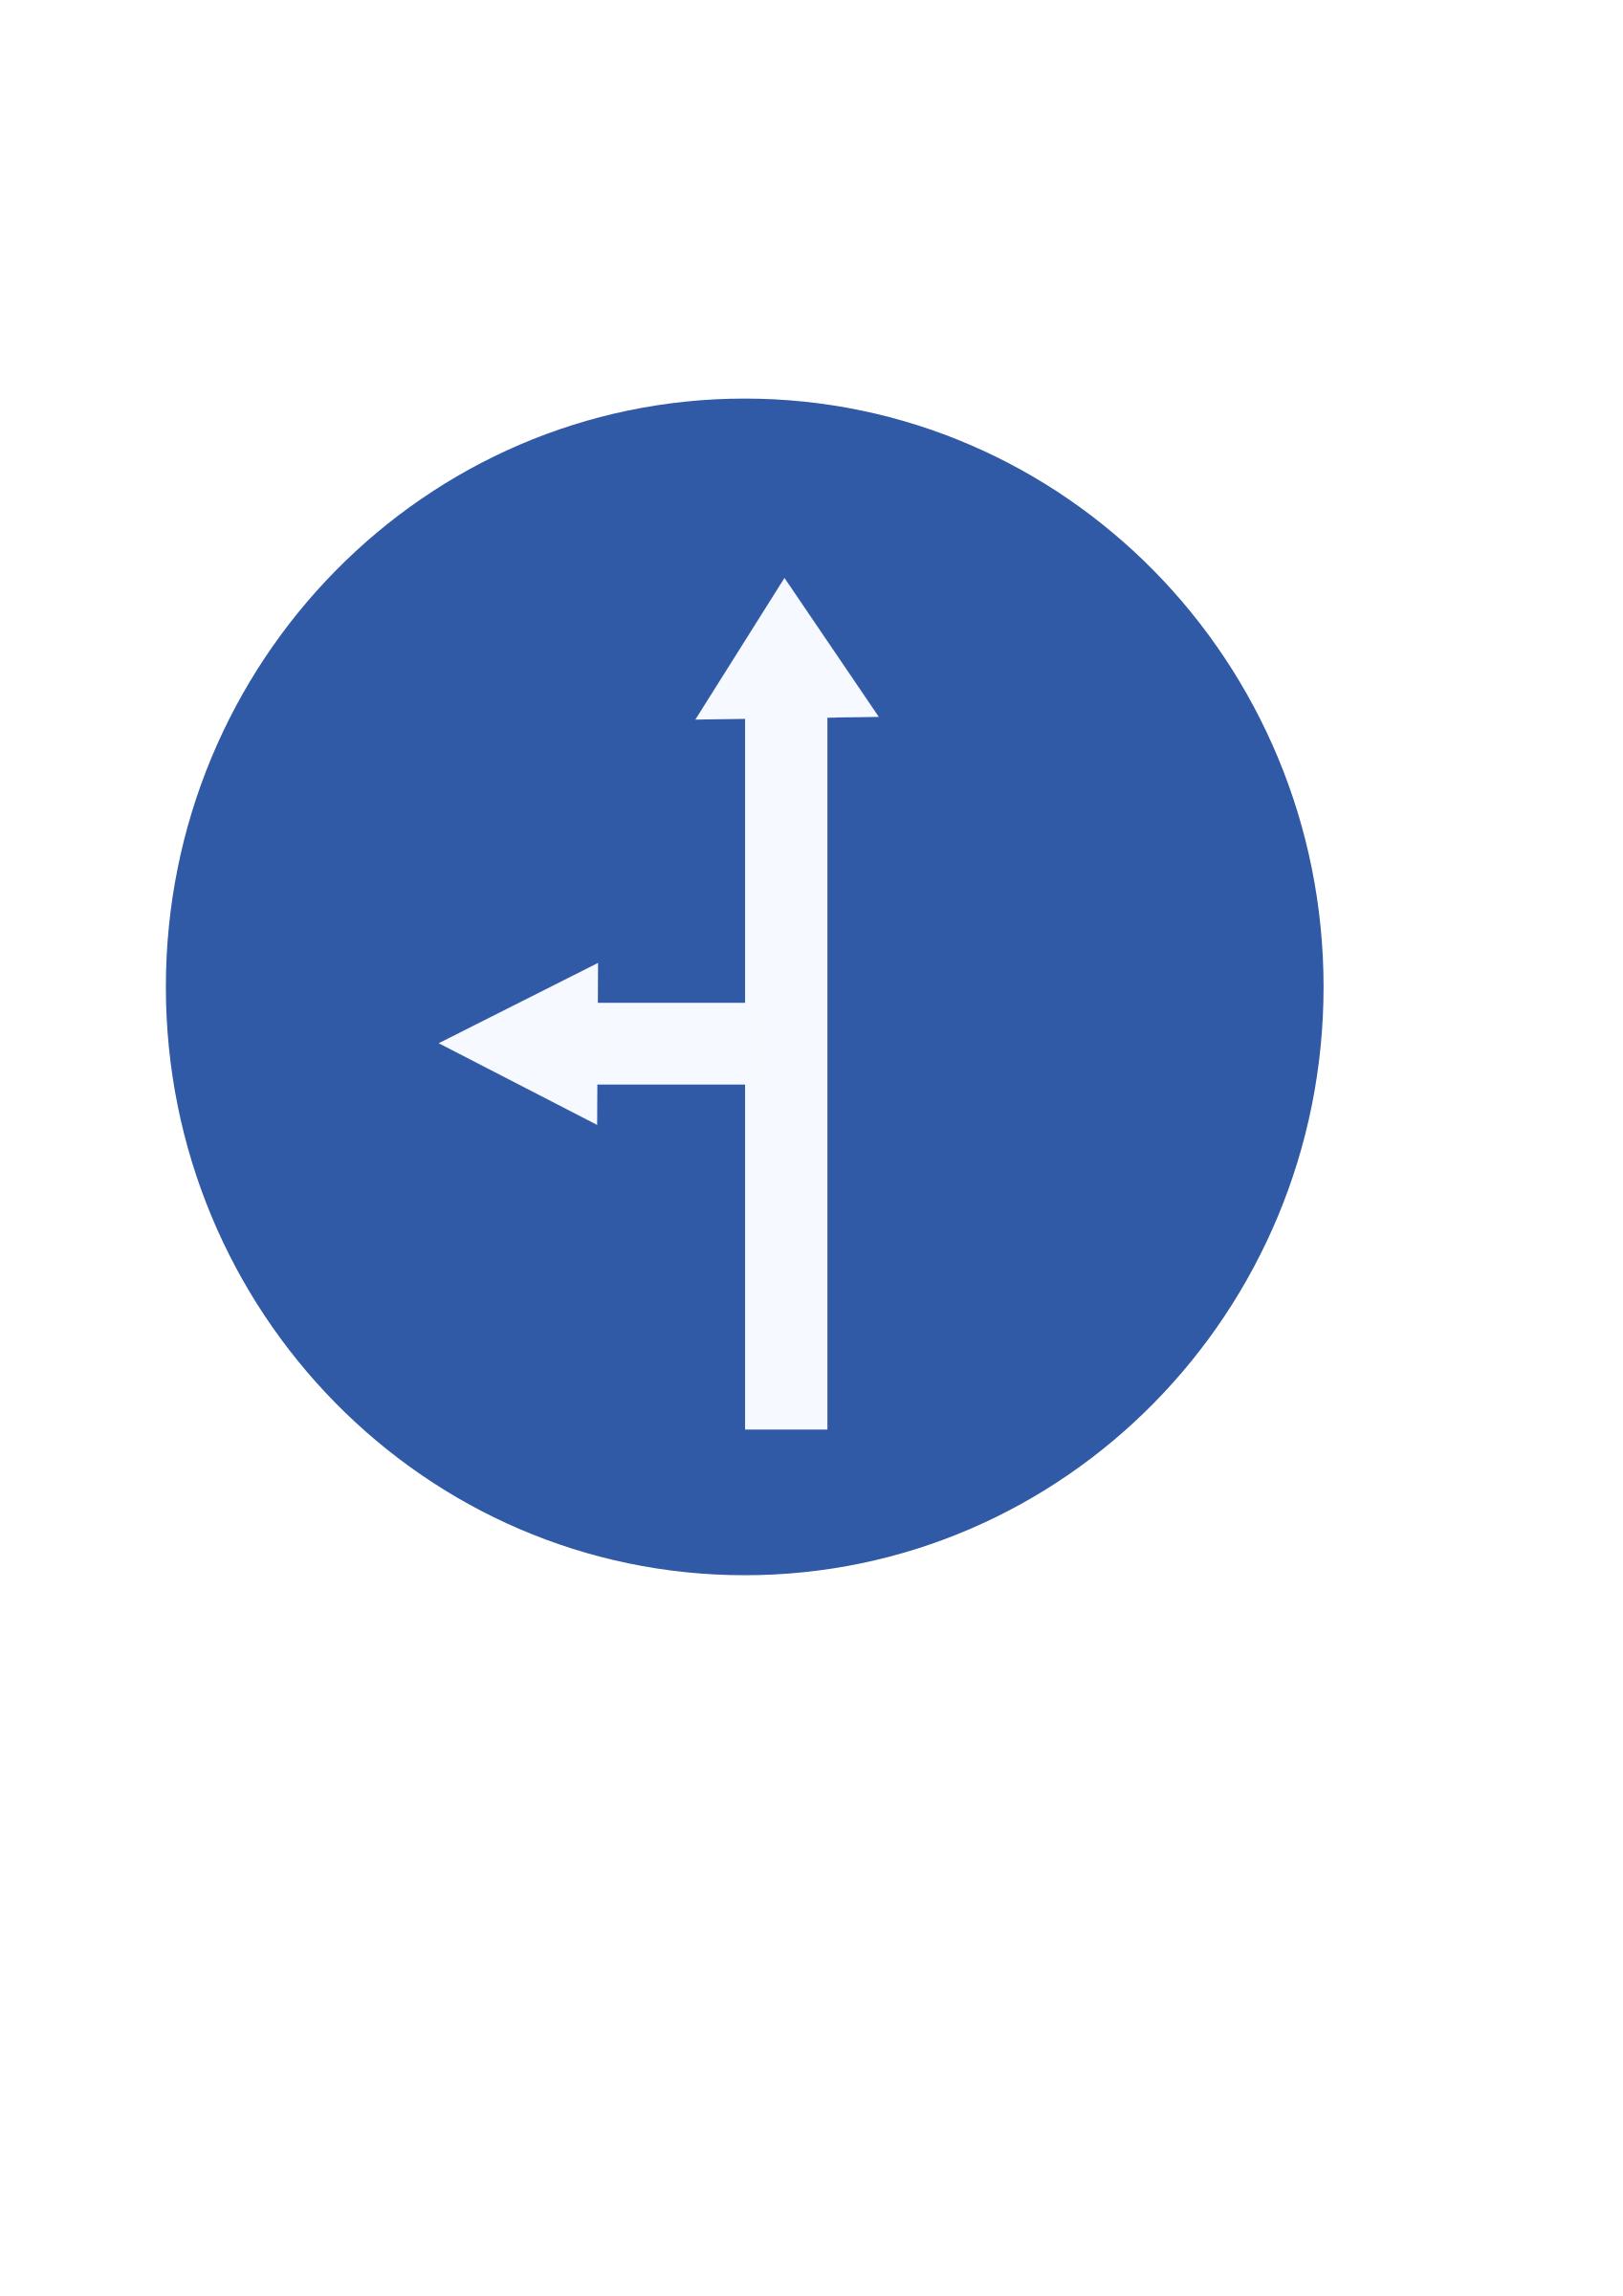 Indian road sign - Ahead or turn left png